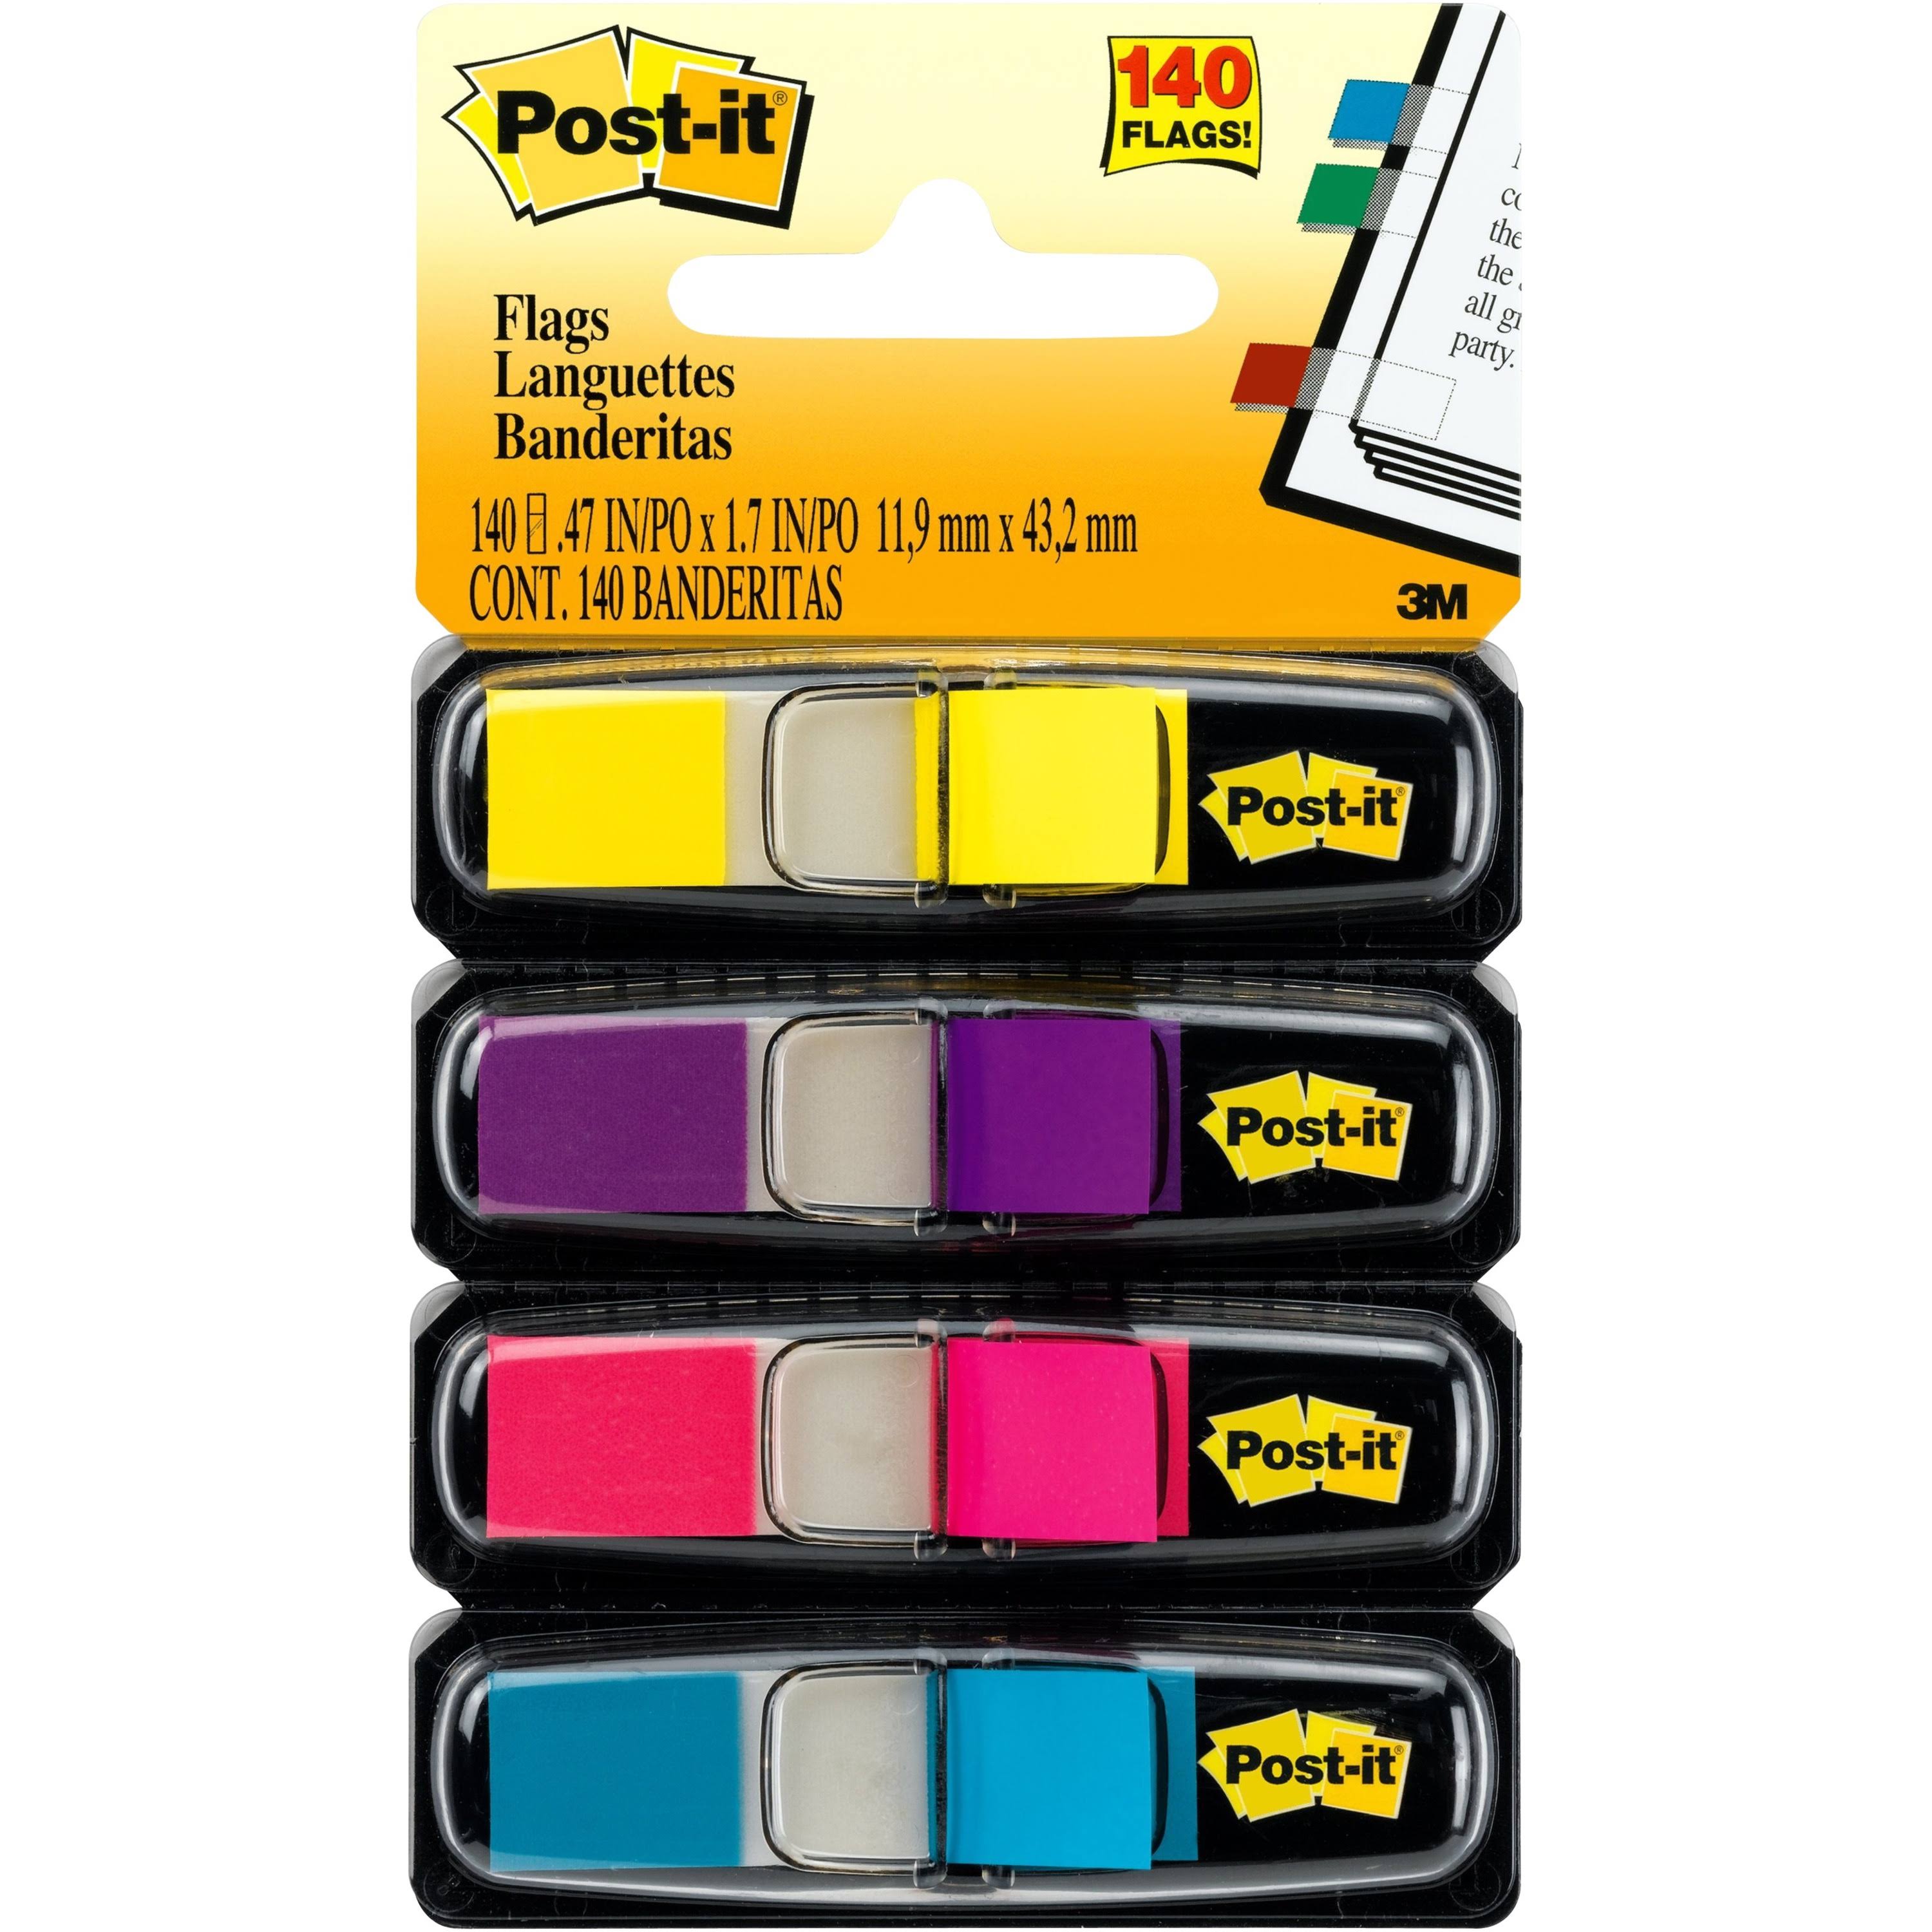 3m Post It Flags - Assorted Bright Colors, 140pc